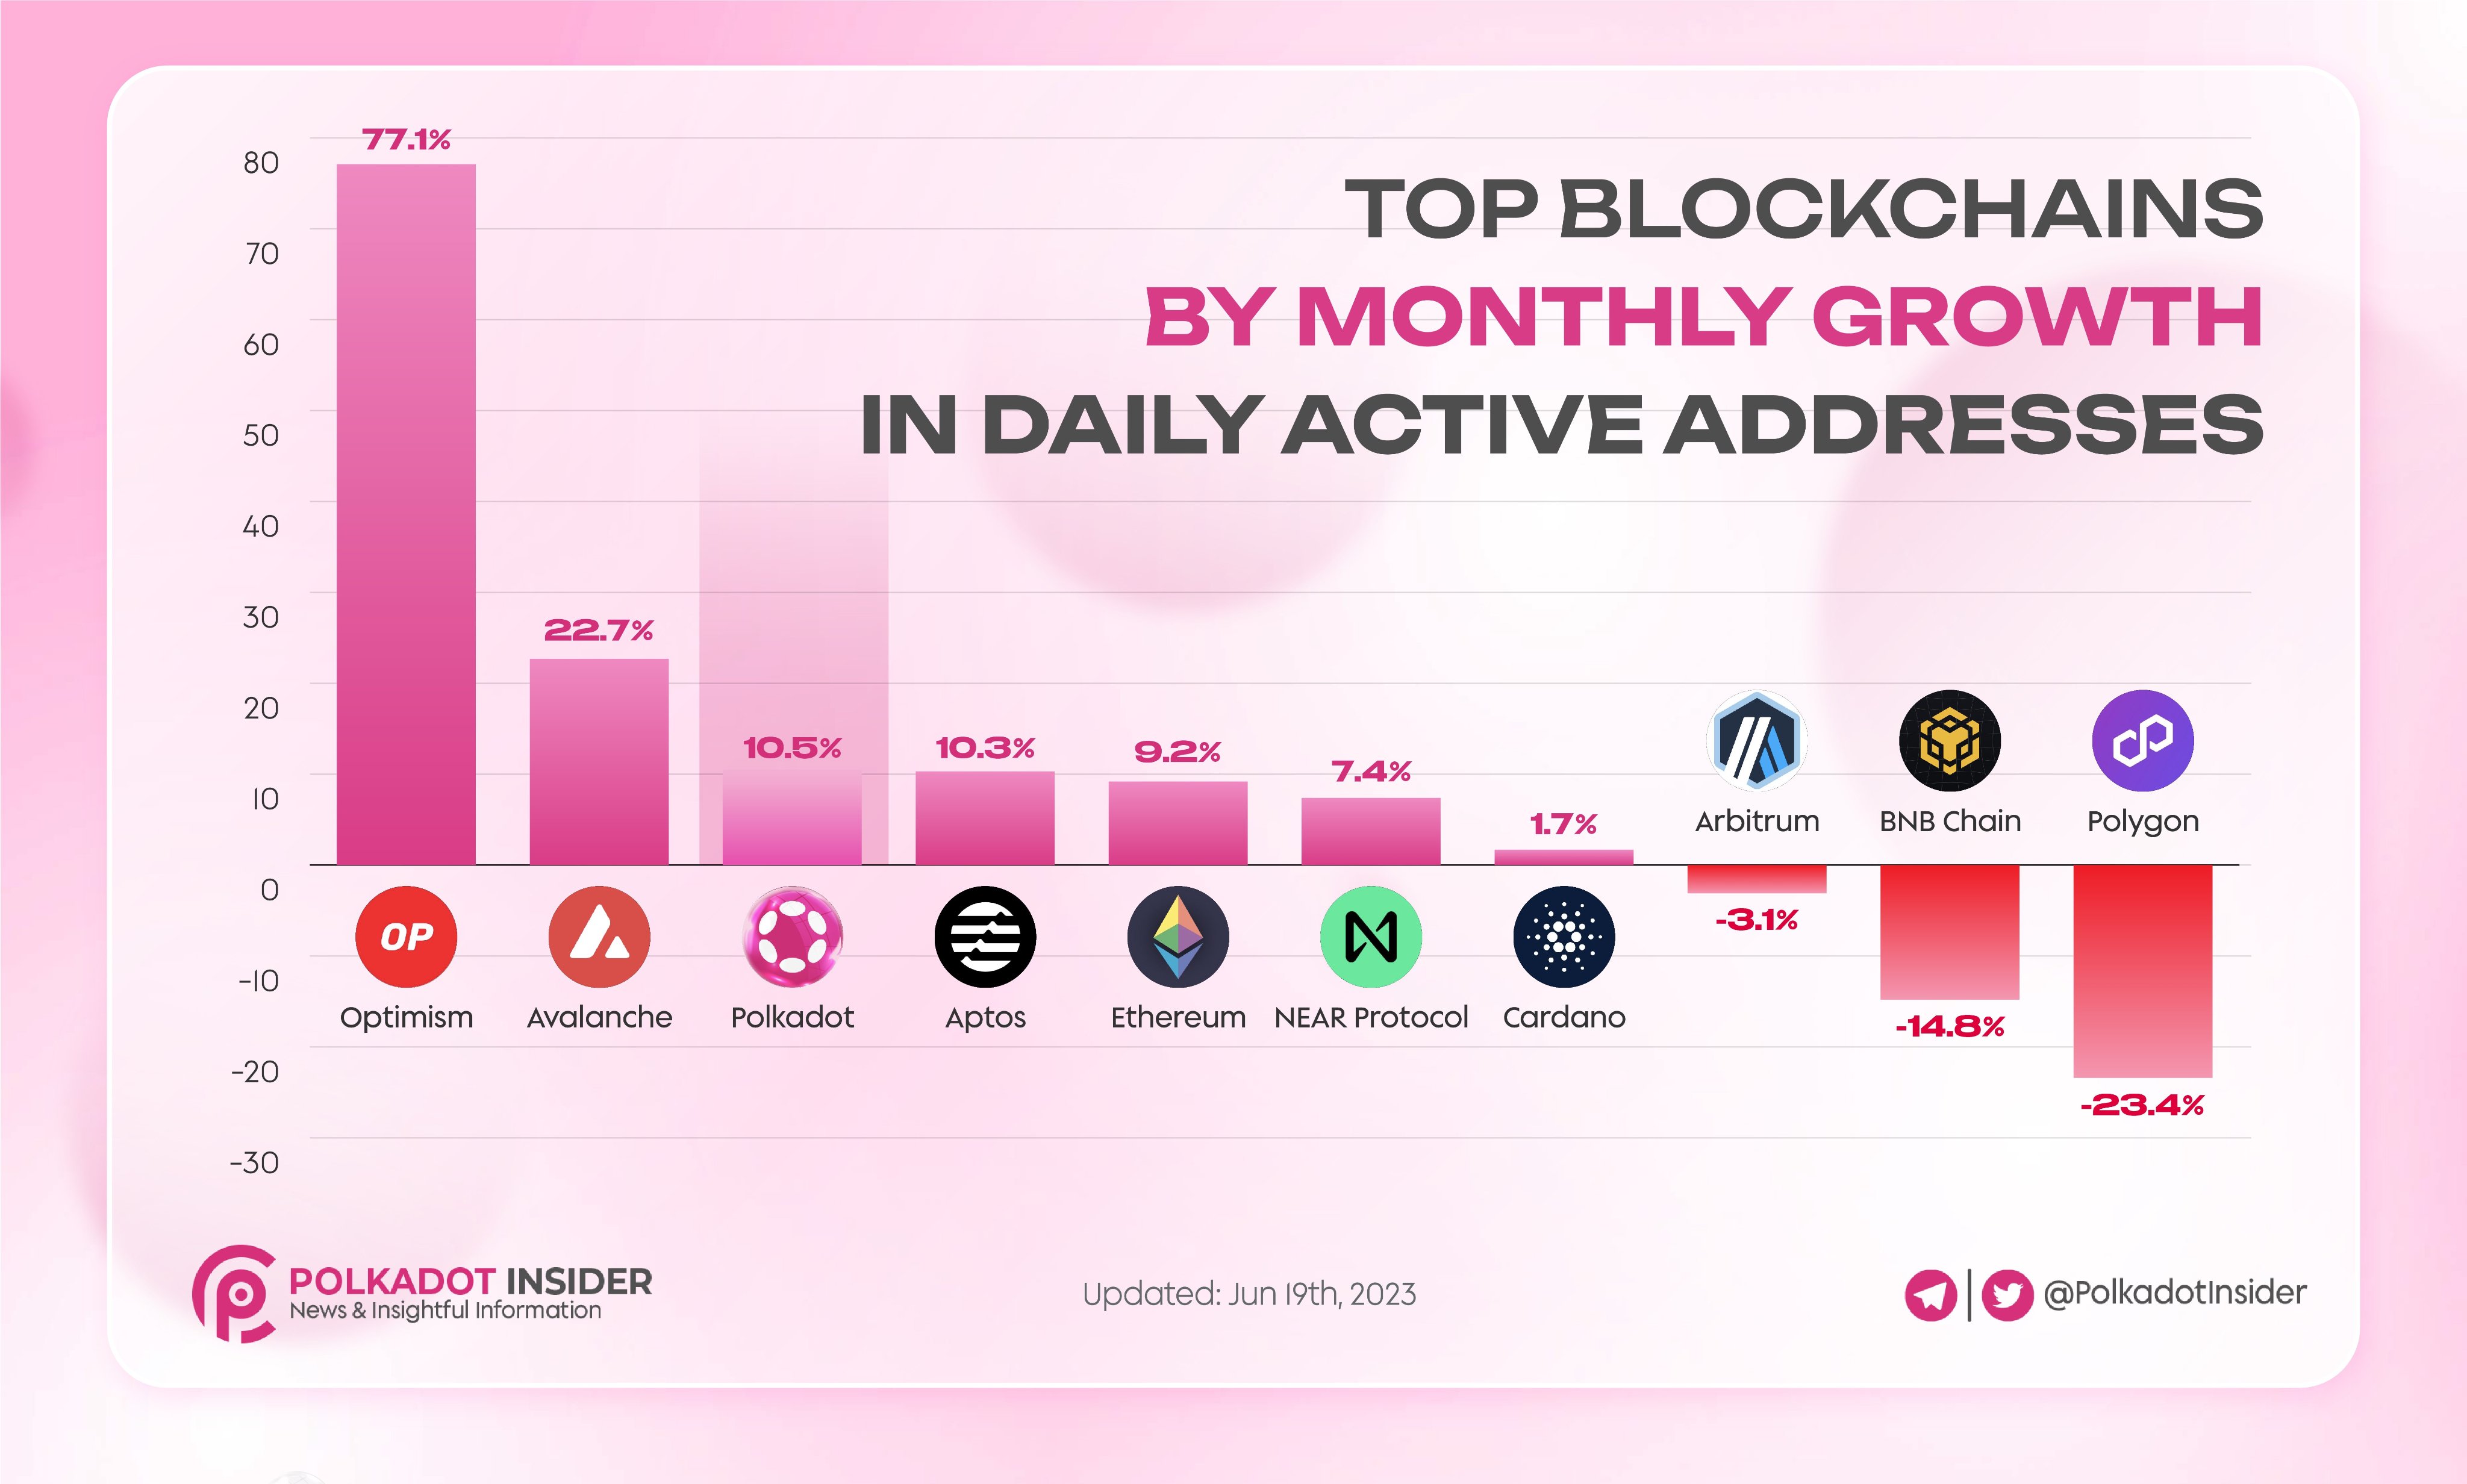 Growth in daily active addresses